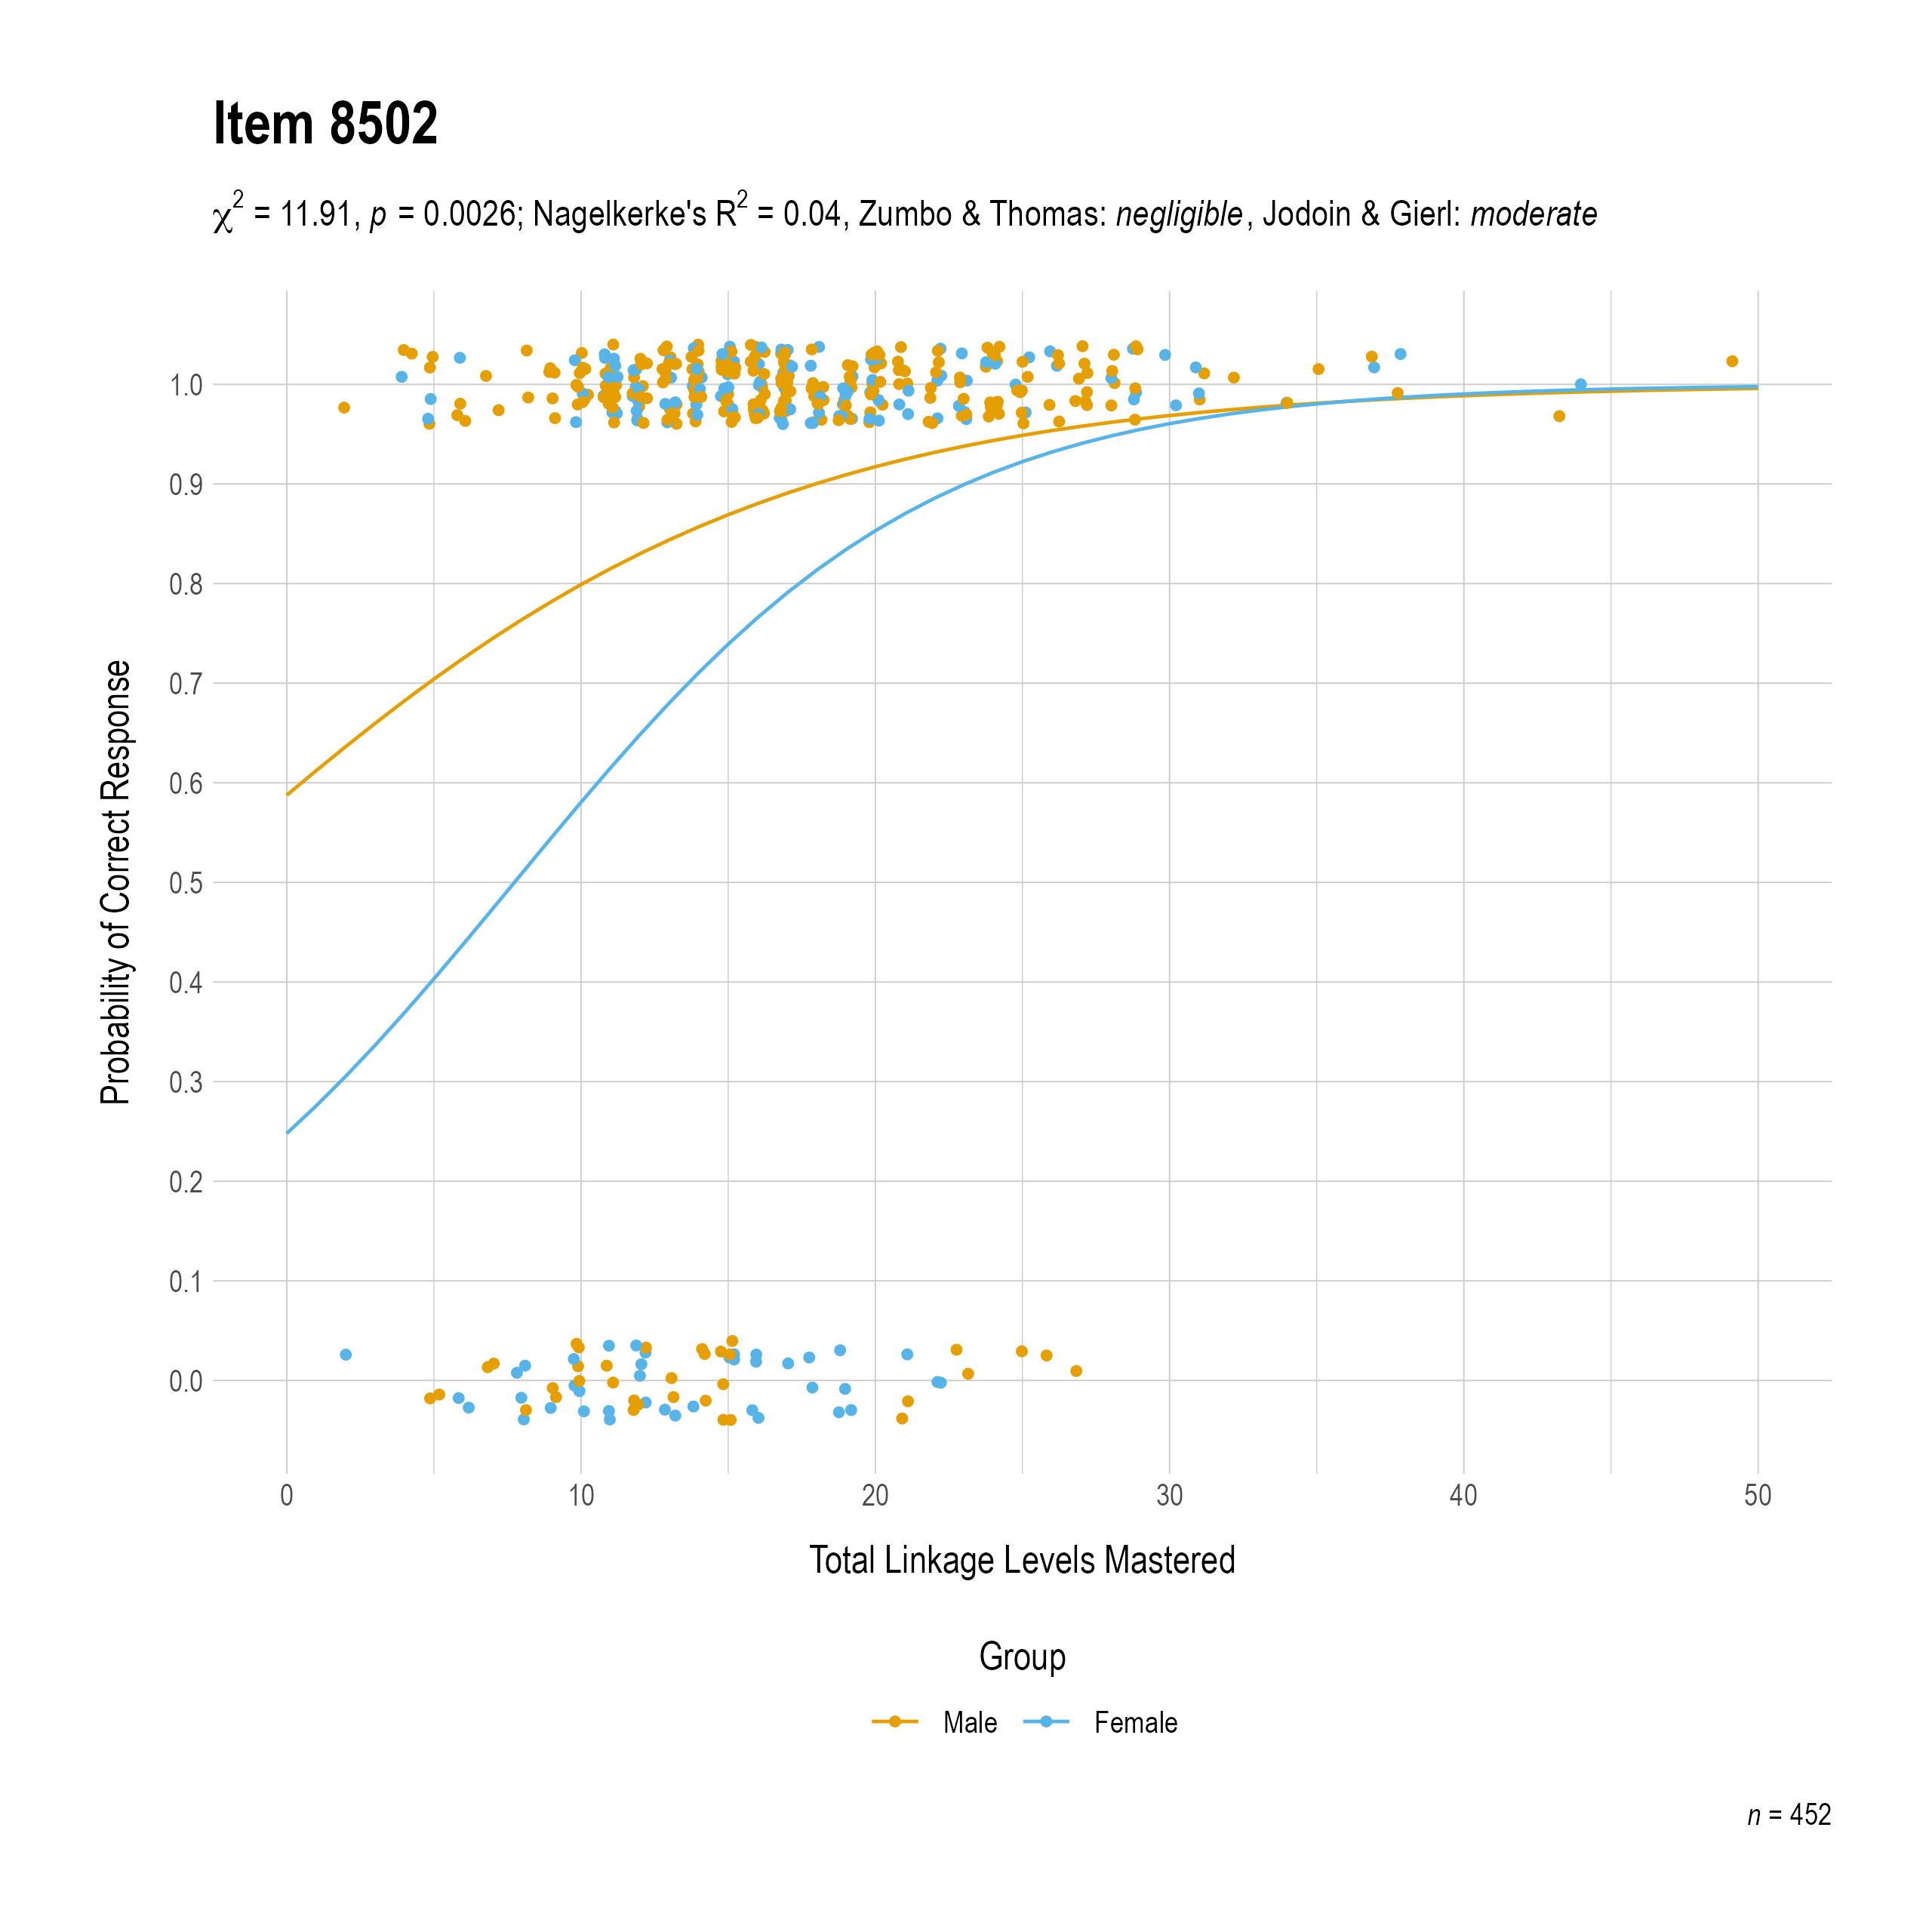 The plot of the combined gender differential item function evidence for Mathematics item 8502. The figure contains points shaded by group. The figure also contains a logistic regression curve for each group. The total linkage levels mastered in is on the x-axis, and the probability of a correct response is on the y-axis.